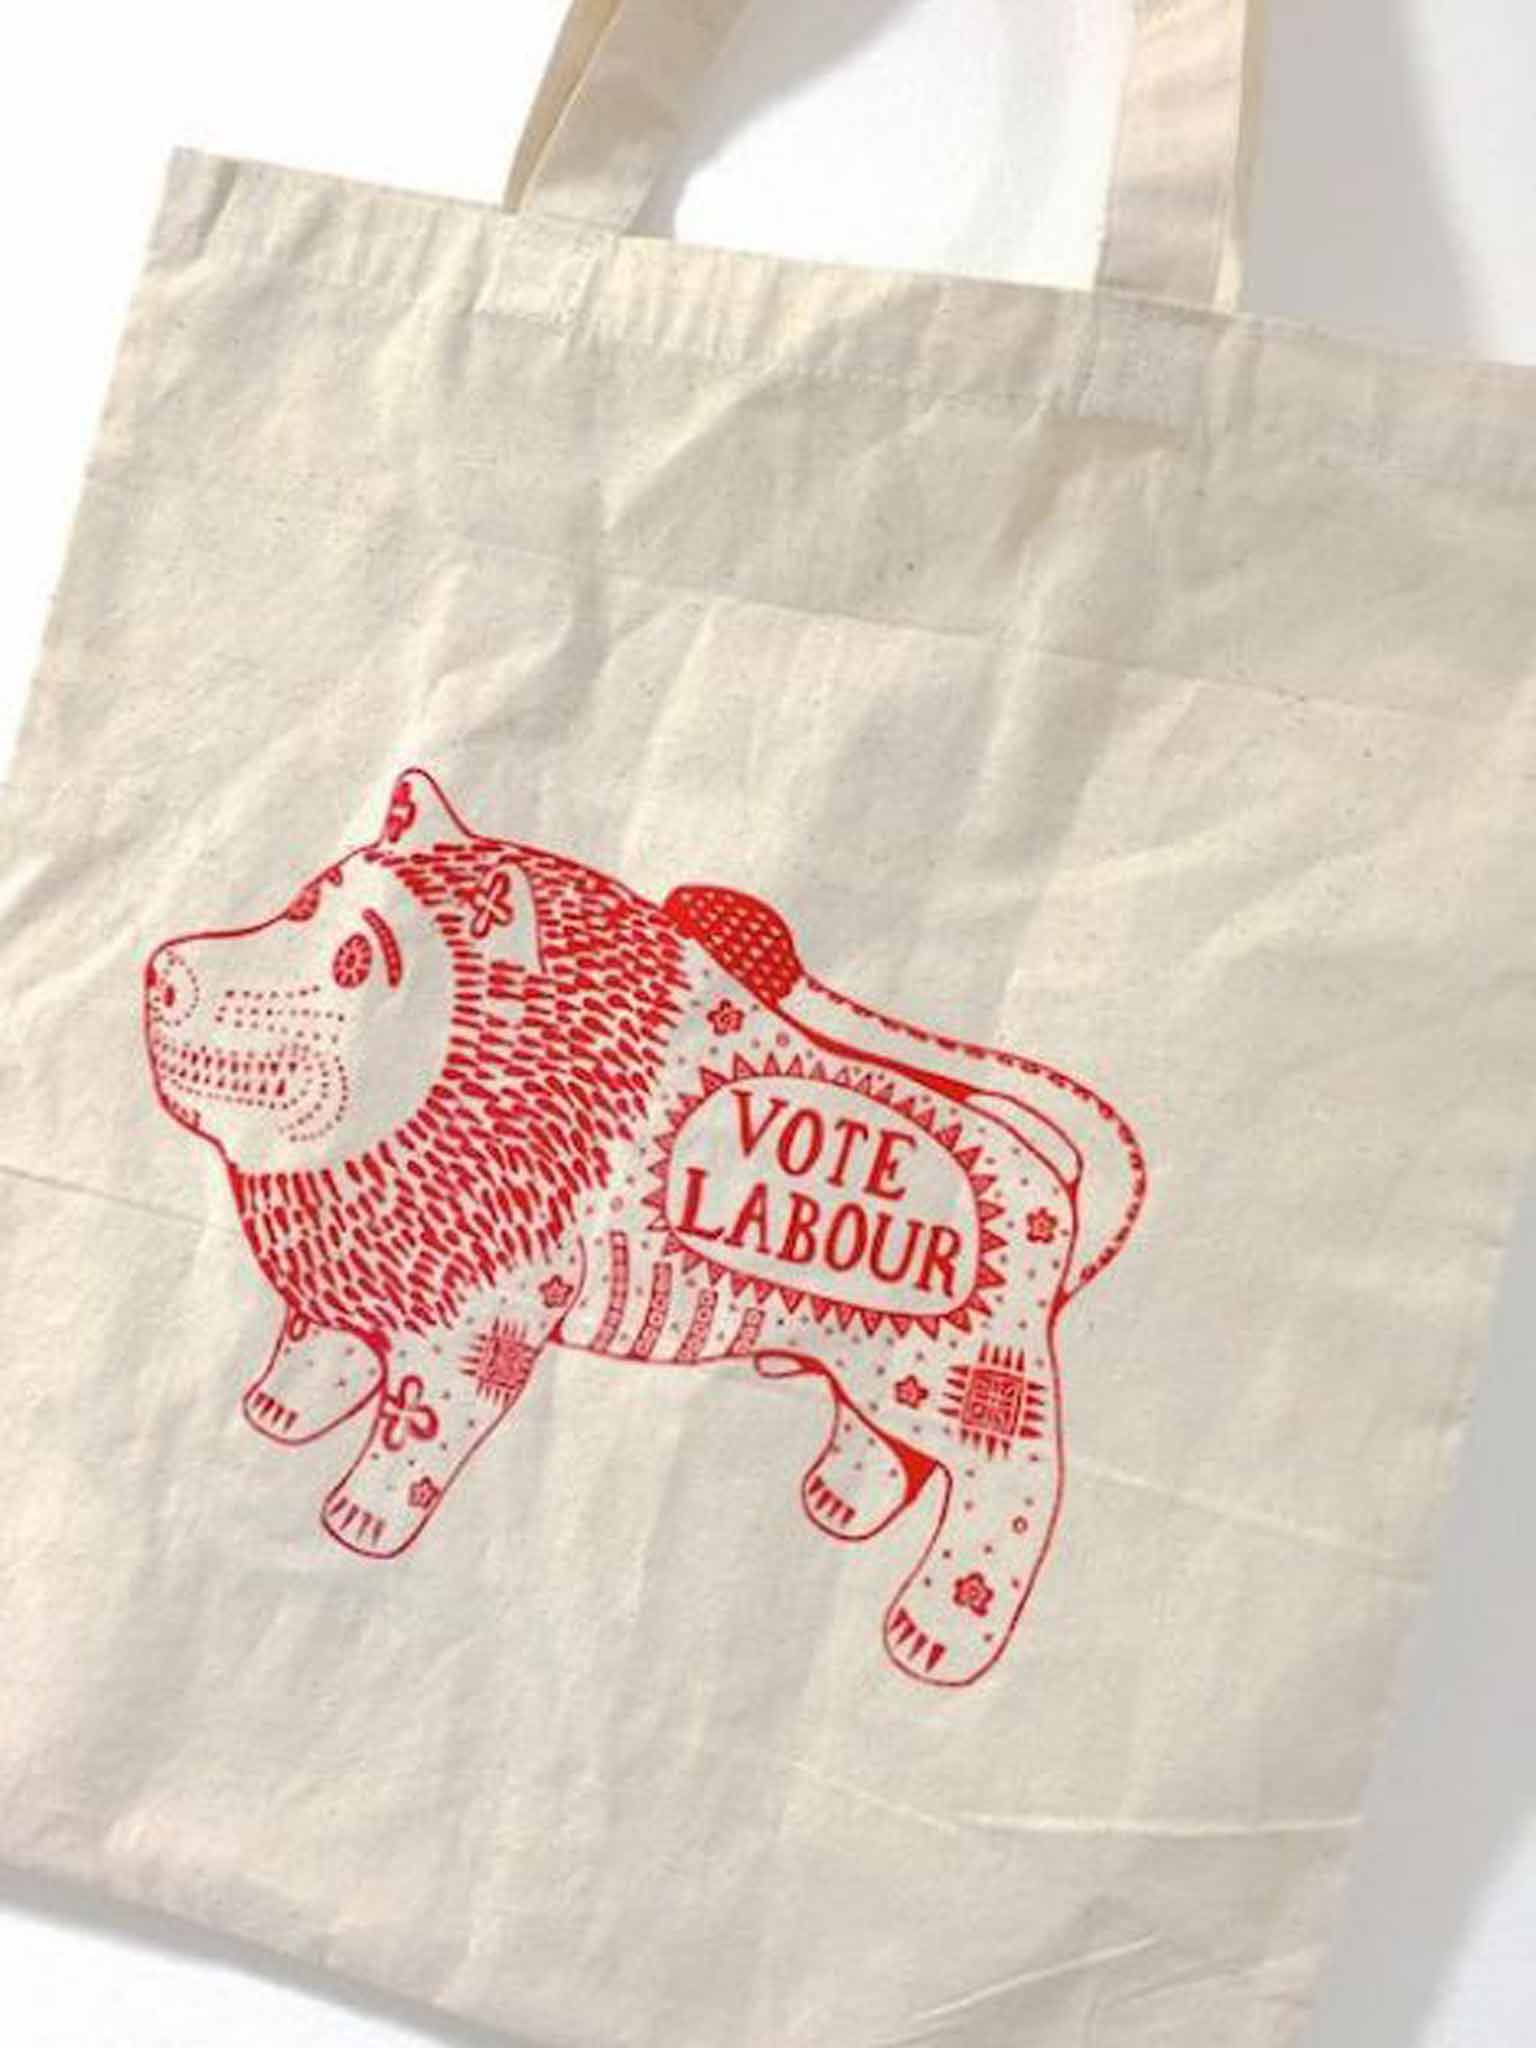 Roar appeal: Grayson Perry's lion bag, which is available to Labour supporters for £19